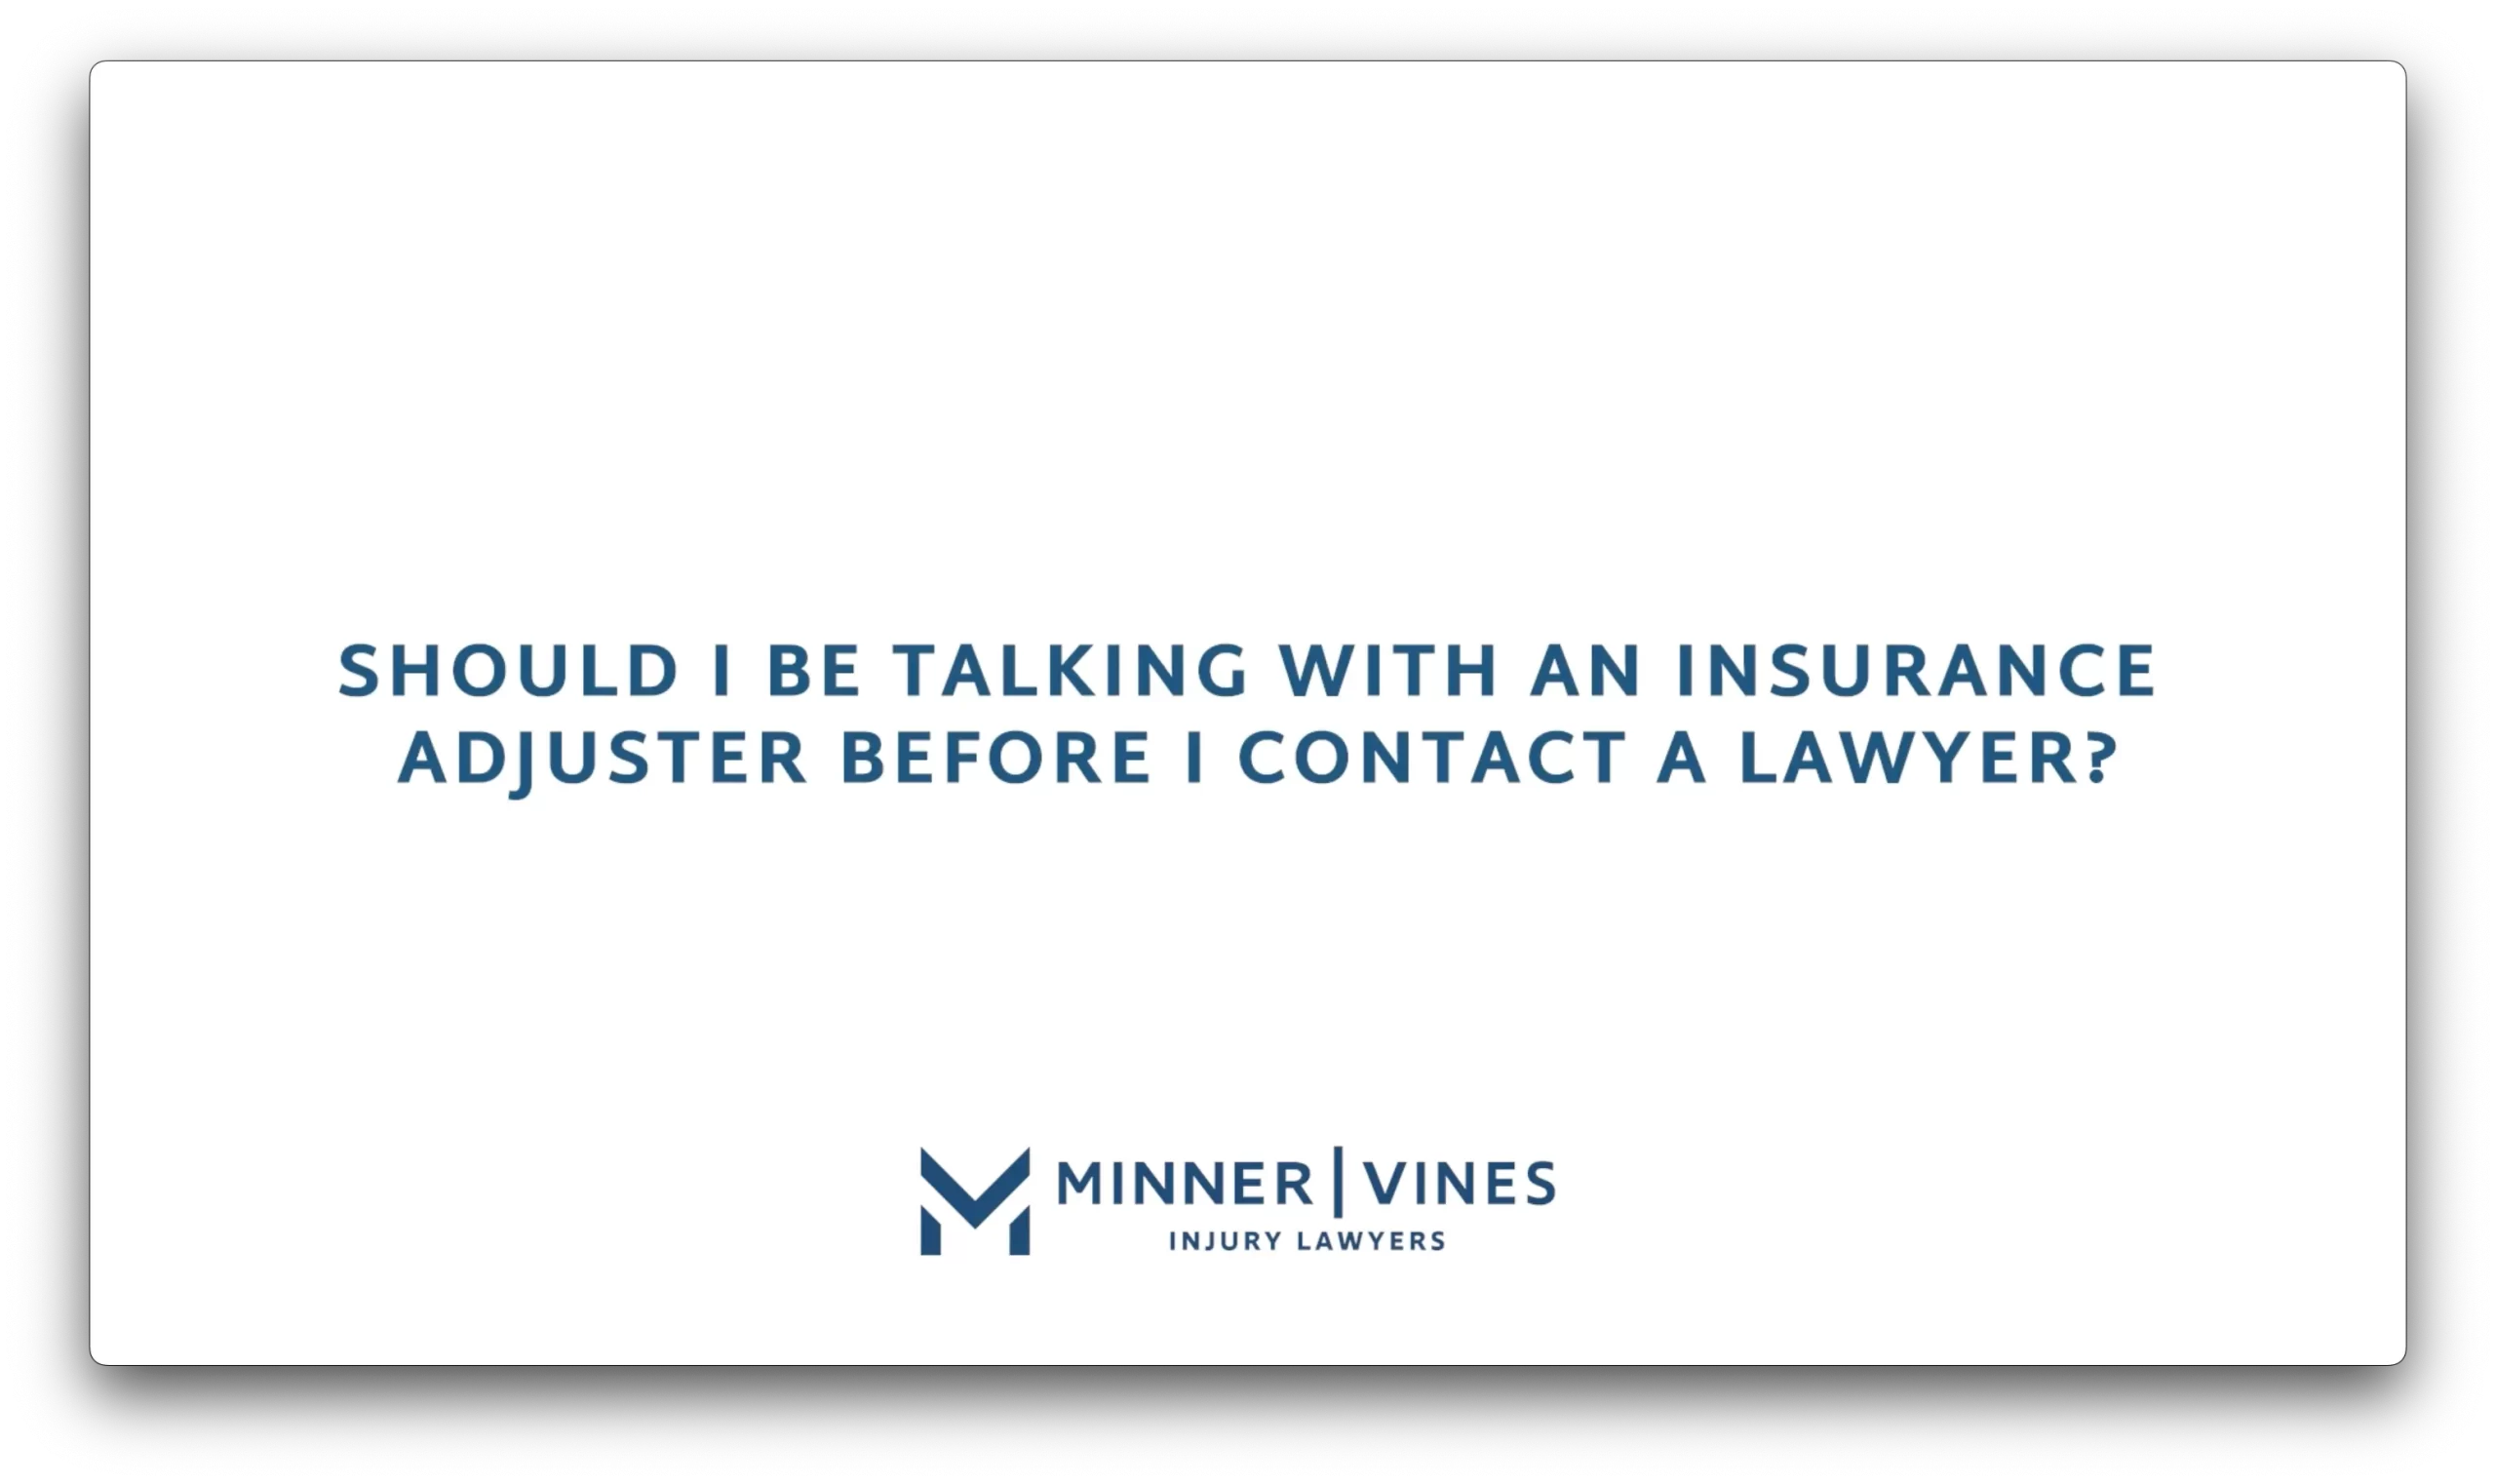 Should I be talking with an insurance adjuster before I contact a lawyer?